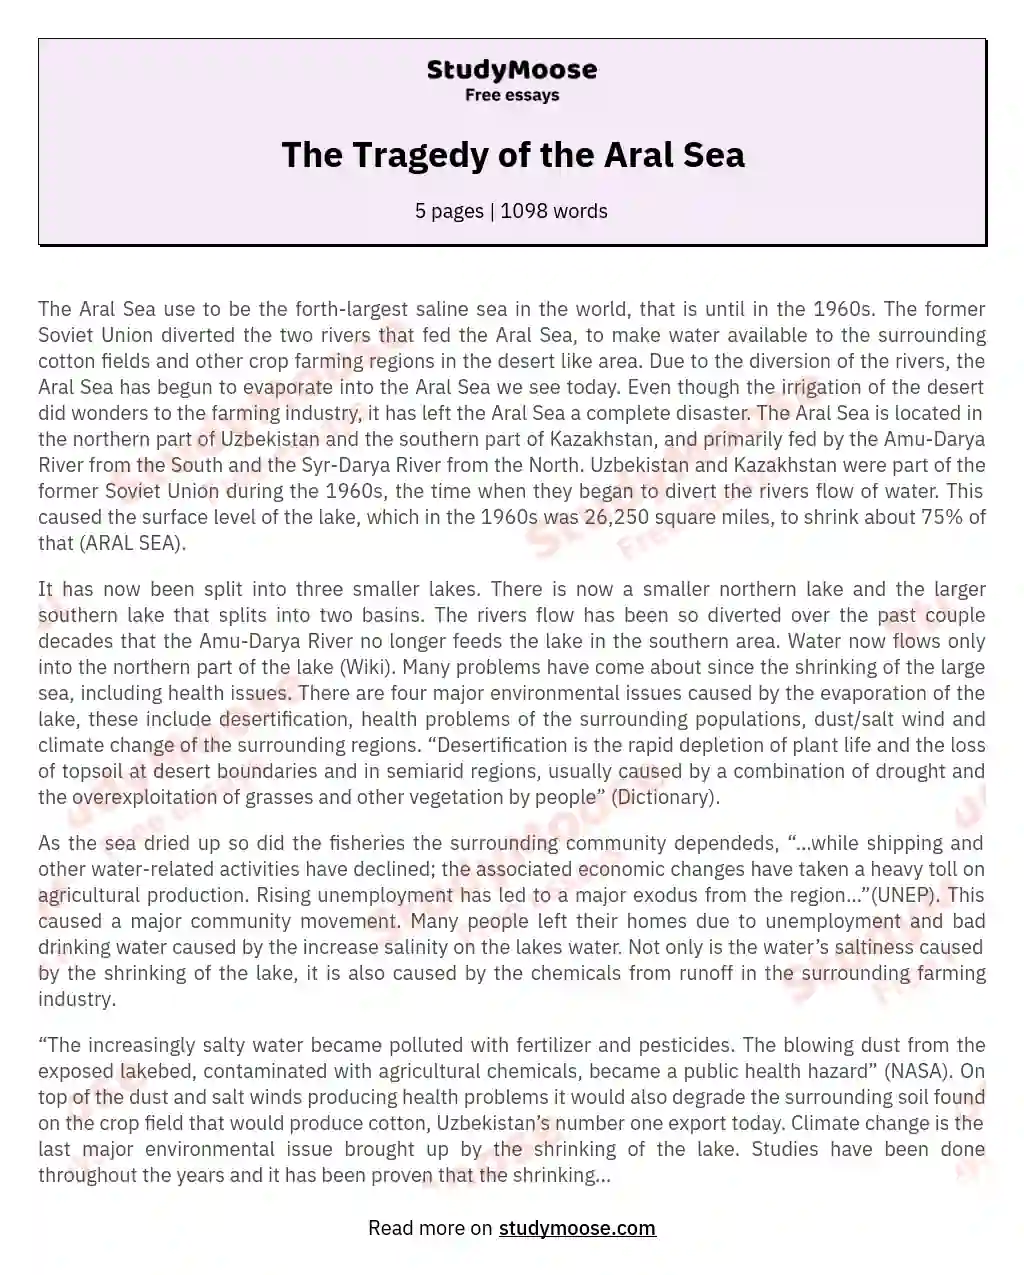 The Tragedy of the Aral Sea essay